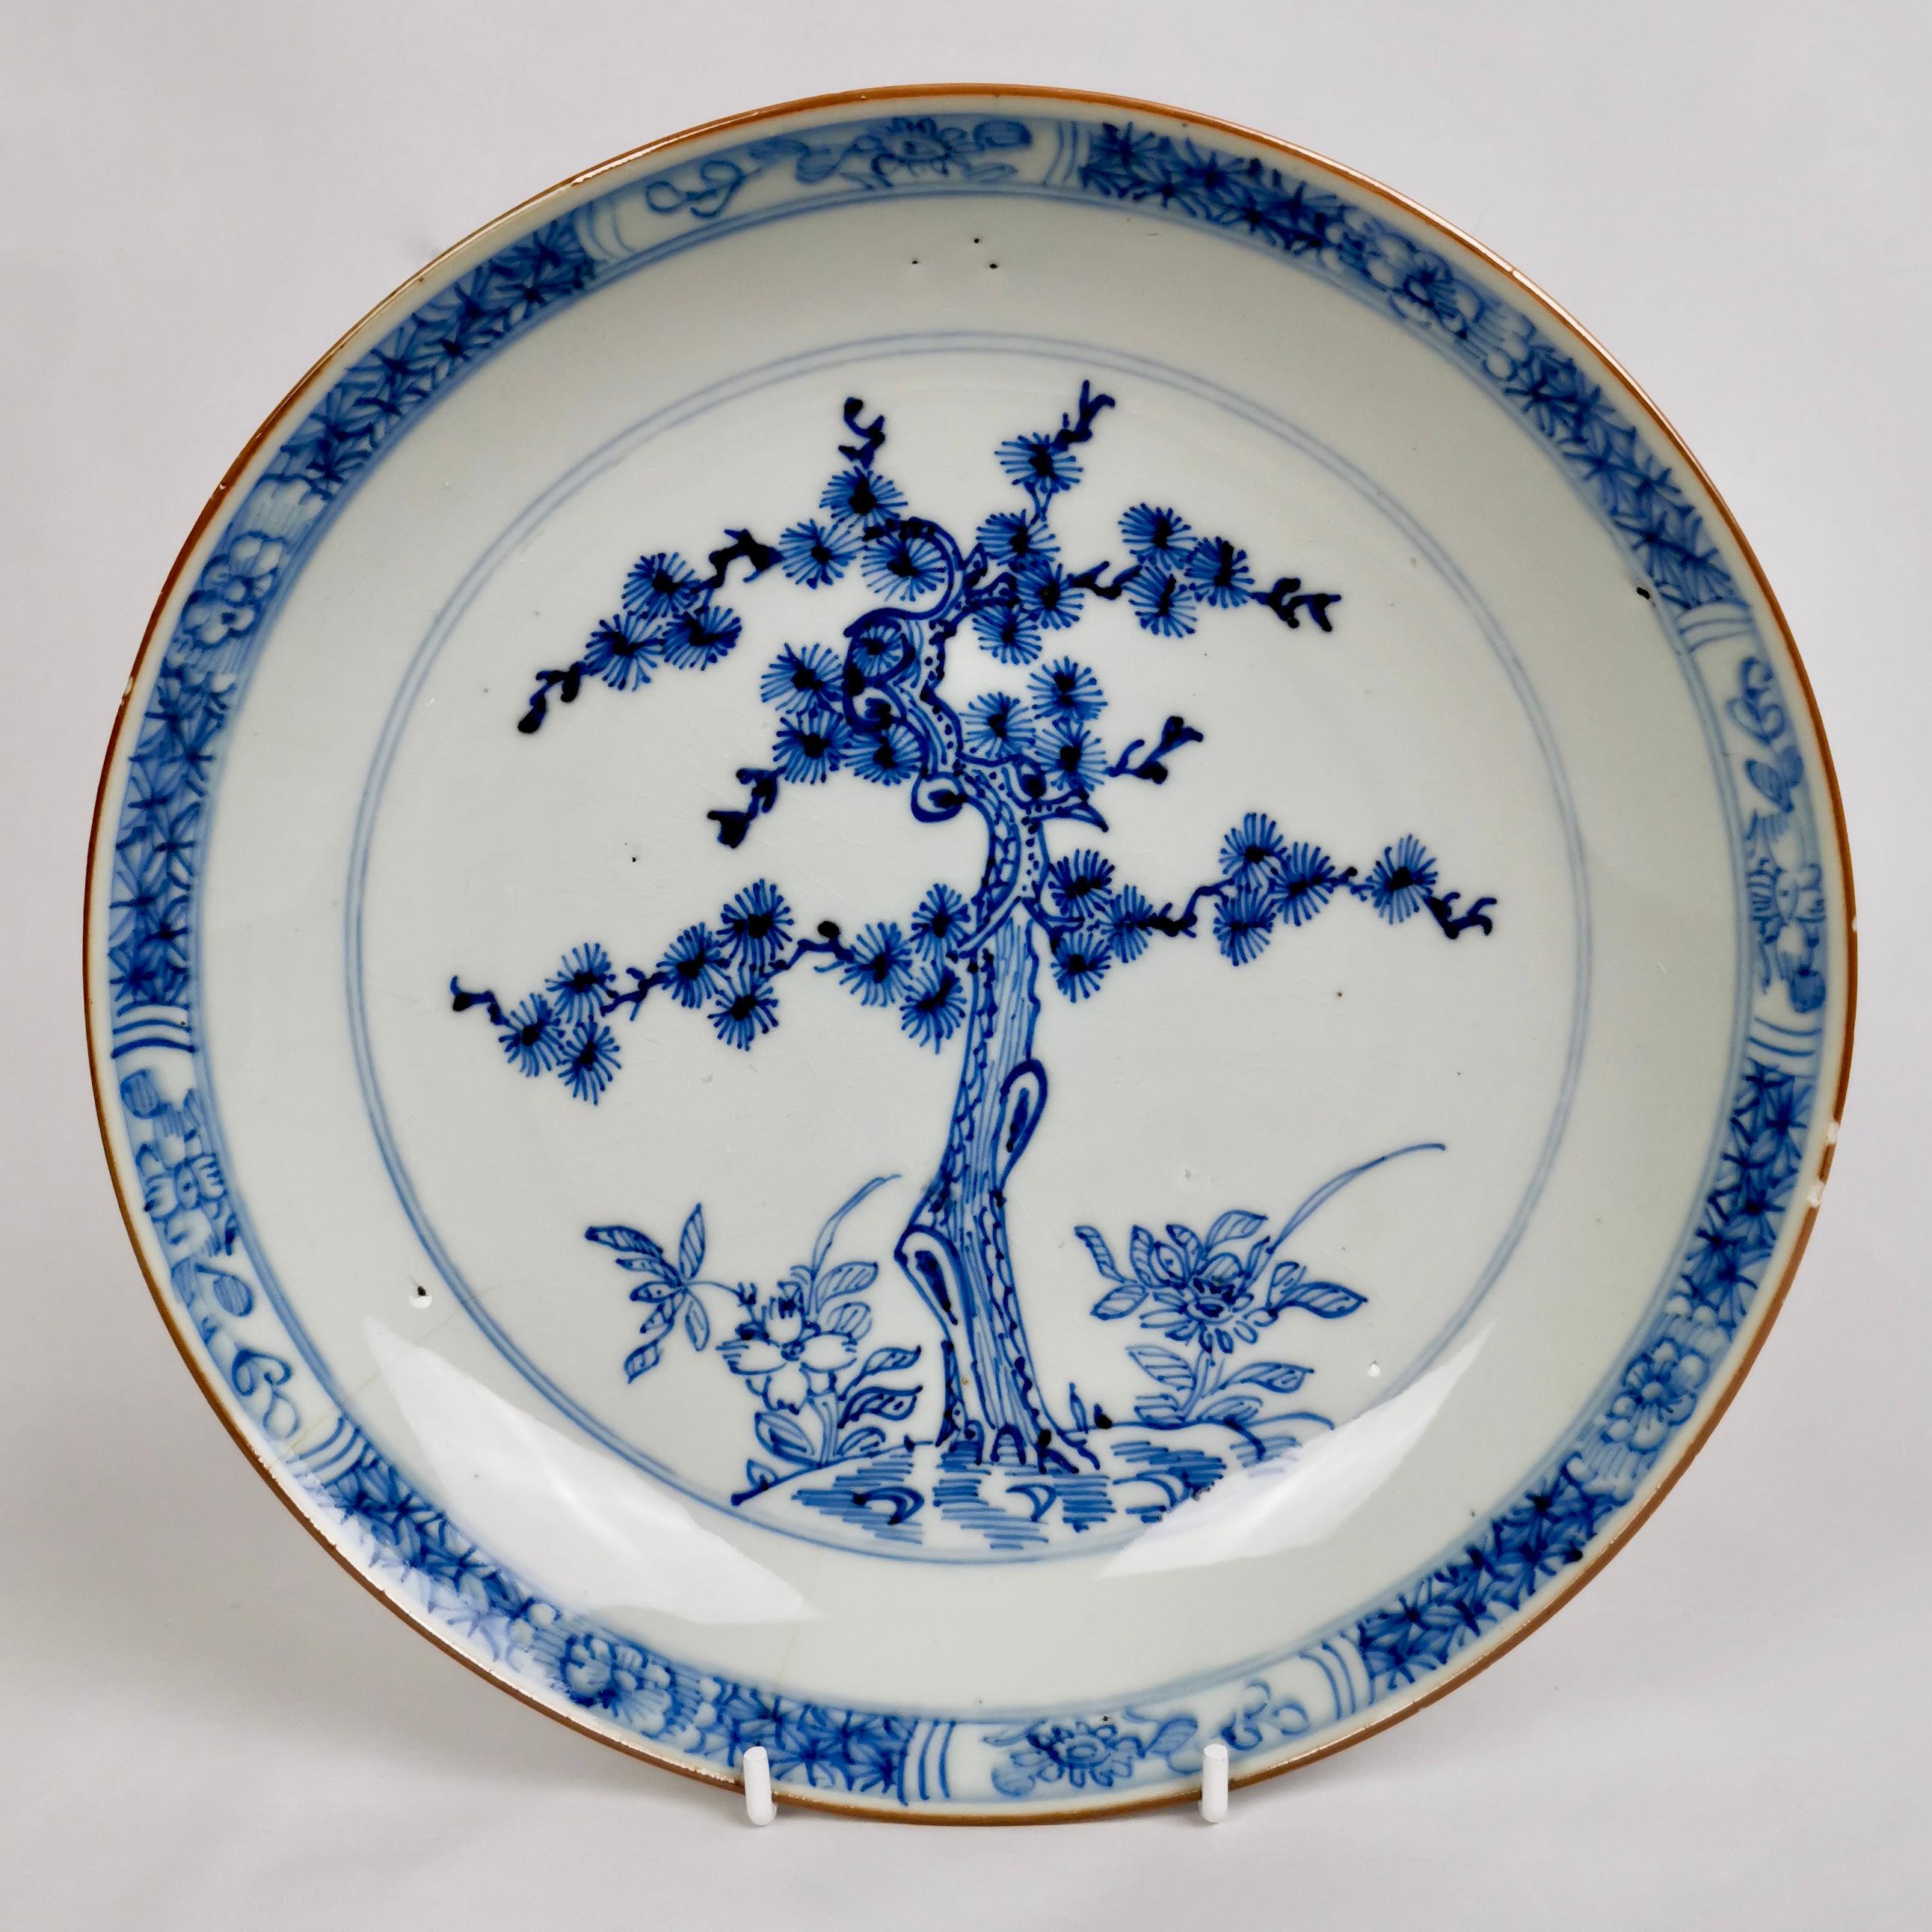 This is a beautiful set of five deep plates made in China for export to the West in the late Kangxi era, ca 1730.

The plates are very lightly potted in blueish glaze. The decoration was executed under the glaze in blue. All plates are beautifully